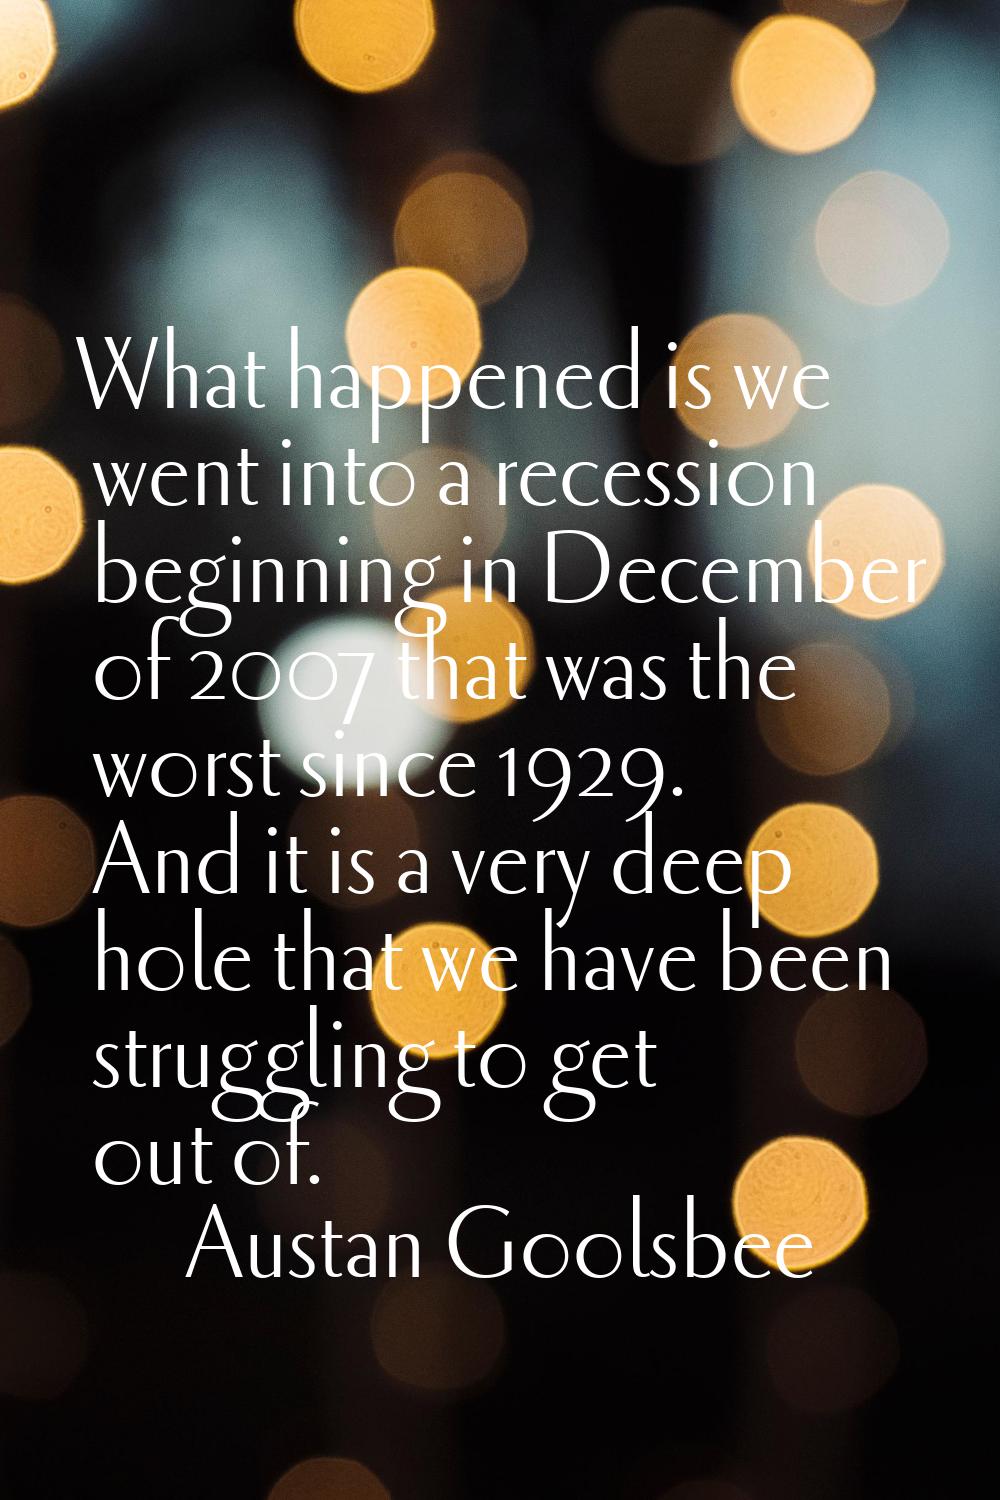 What happened is we went into a recession beginning in December of 2007 that was the worst since 19